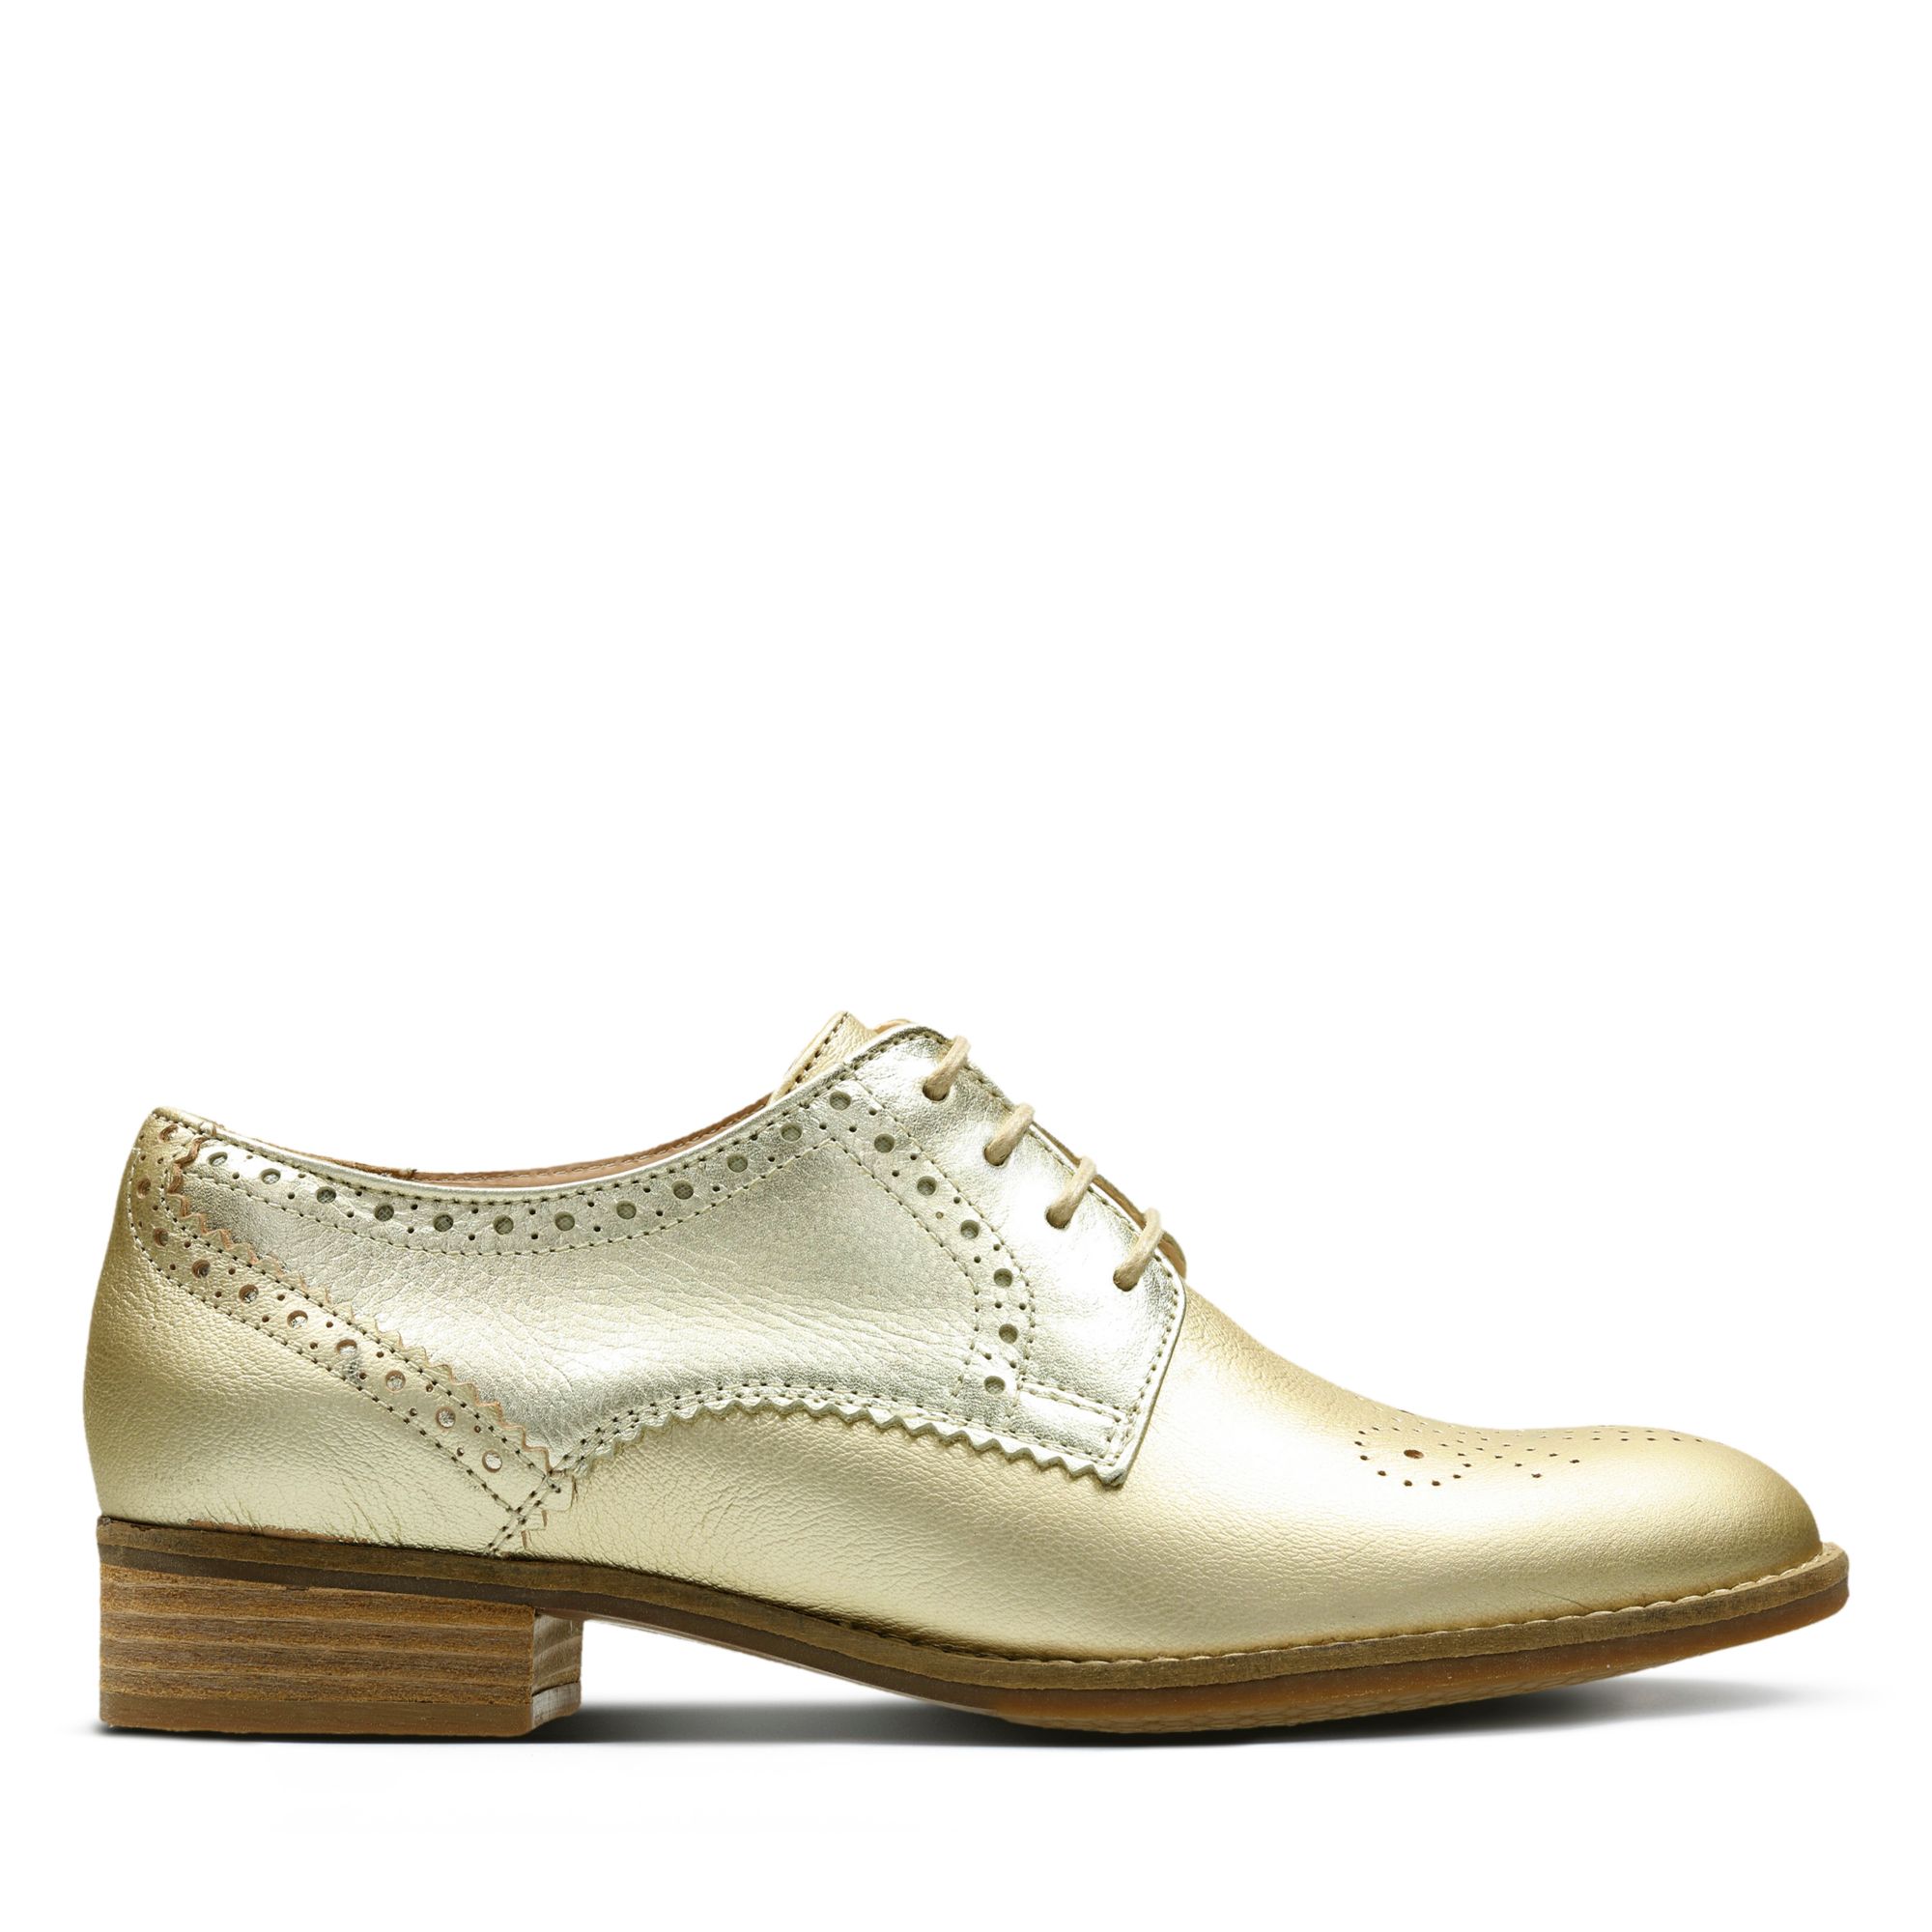 Vintage Inspired Oxford Shoes for Women